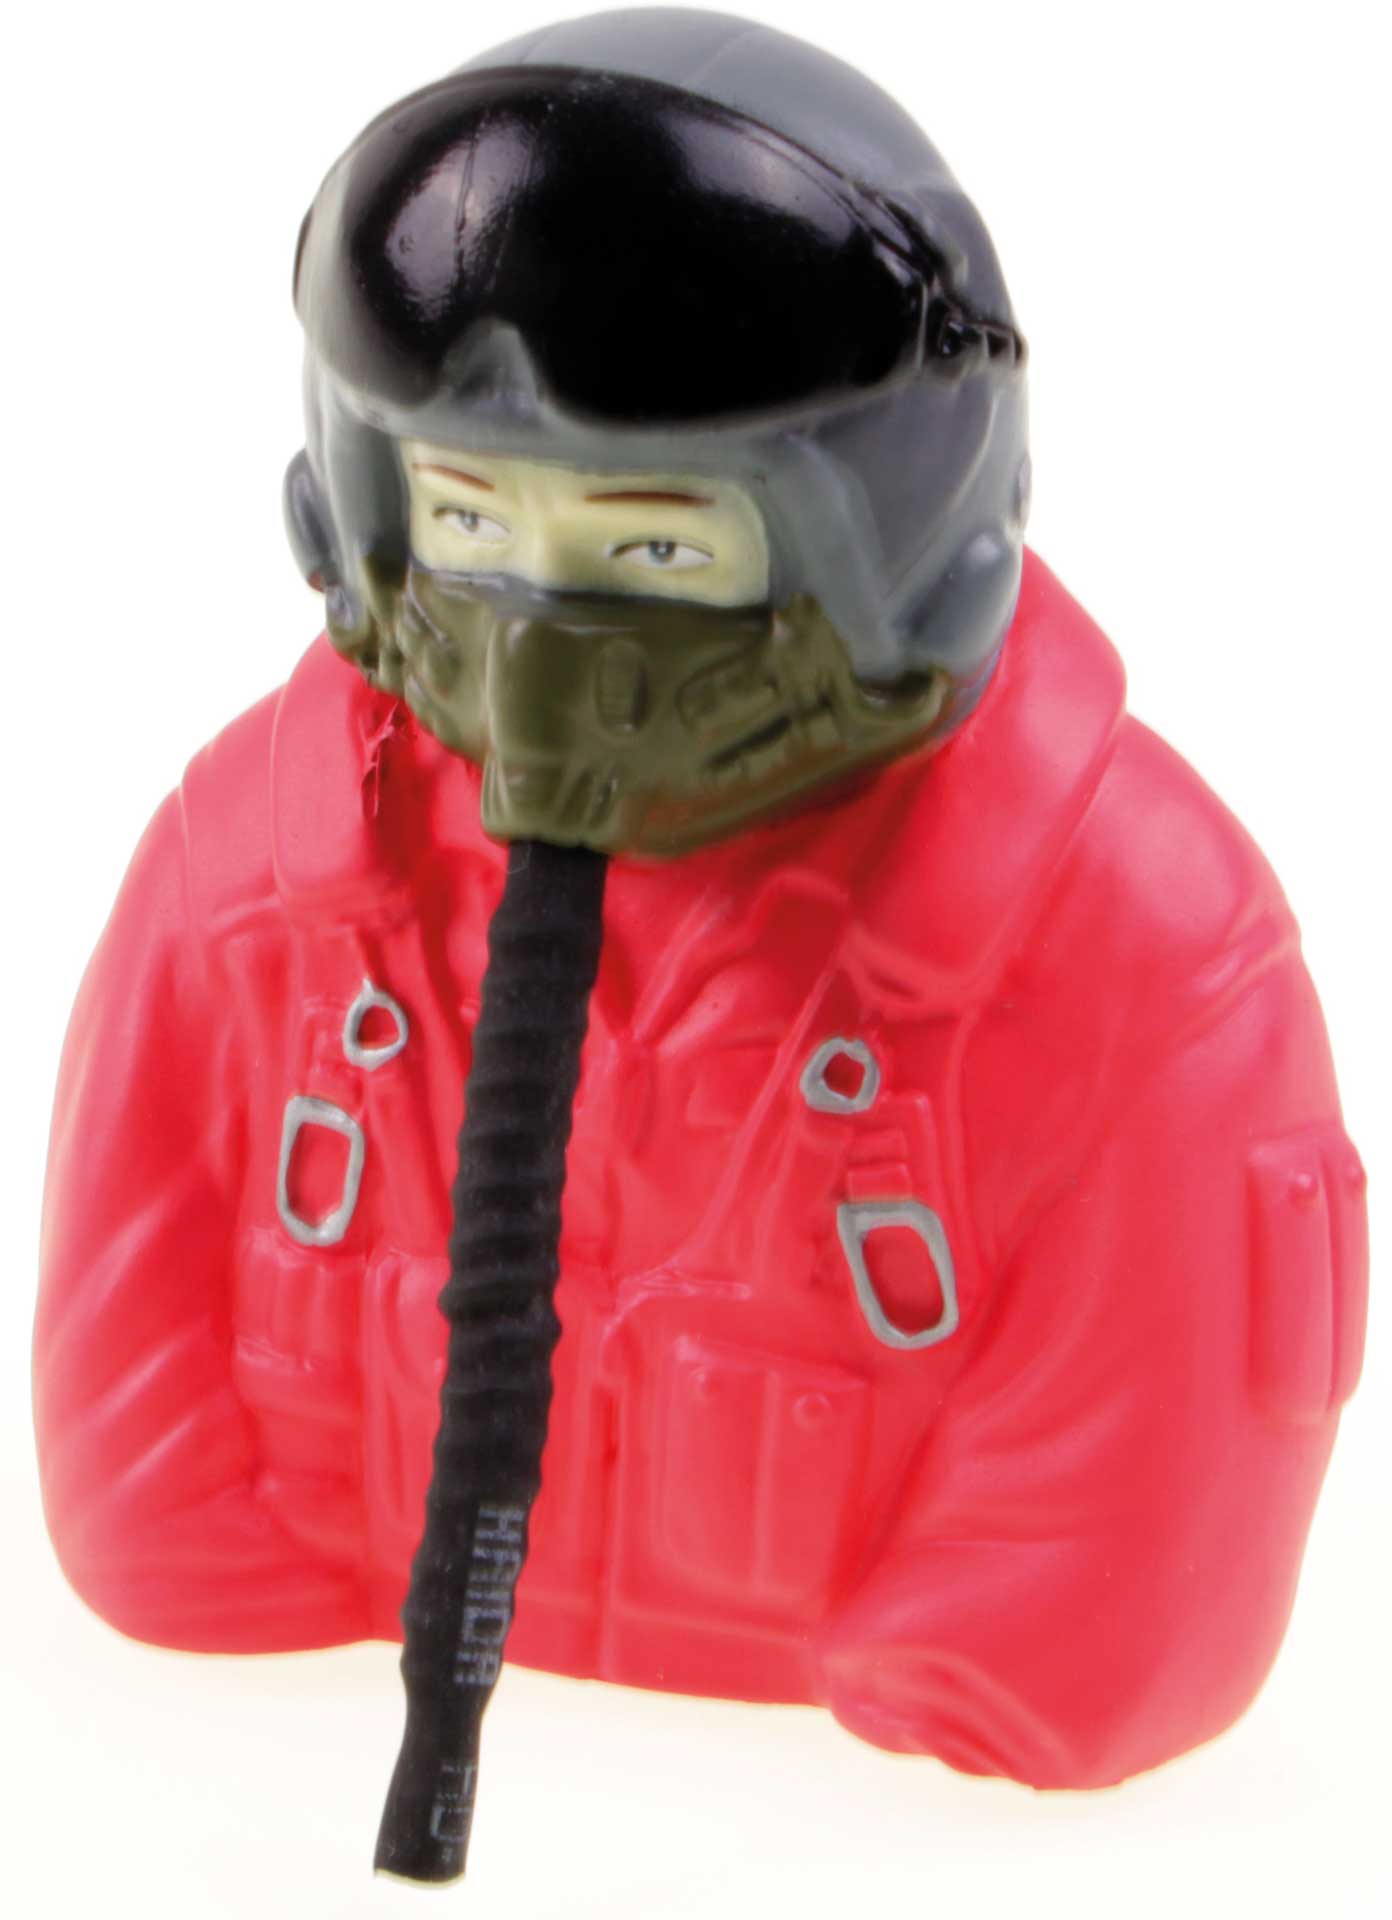 Planet-Hobby 1/7  Jet Pilot Rot Höhe 72mm, Breite 60mm, Tiefe 35mm